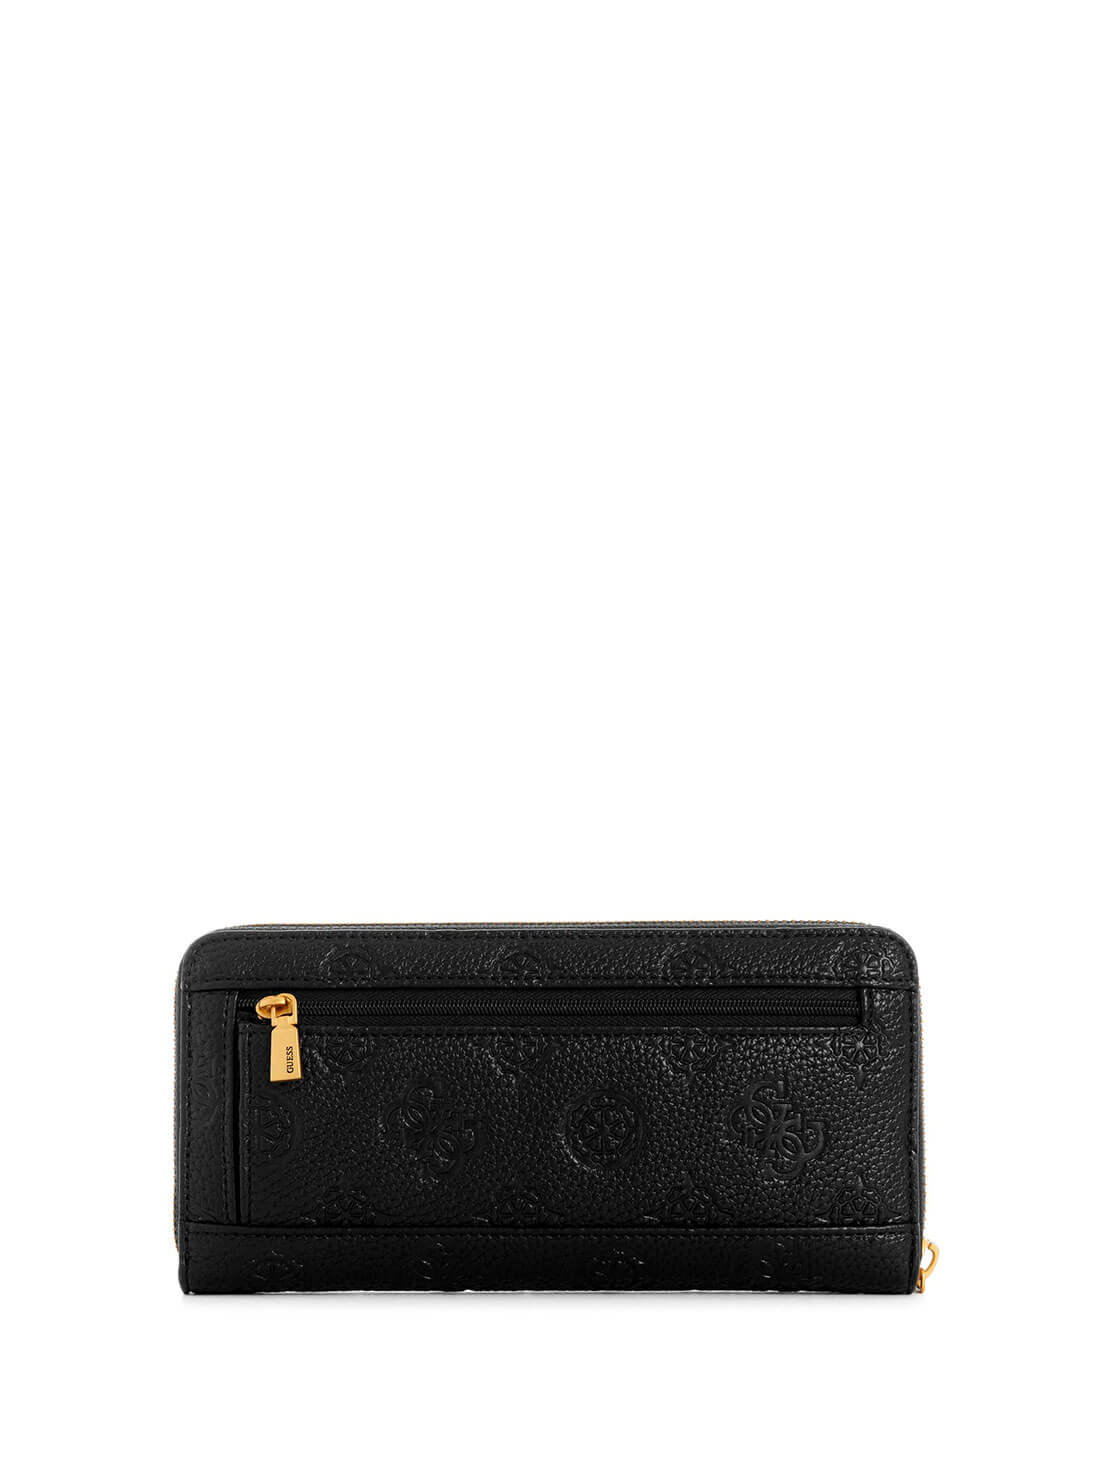 Women's Black Izzy Large Wallet back view